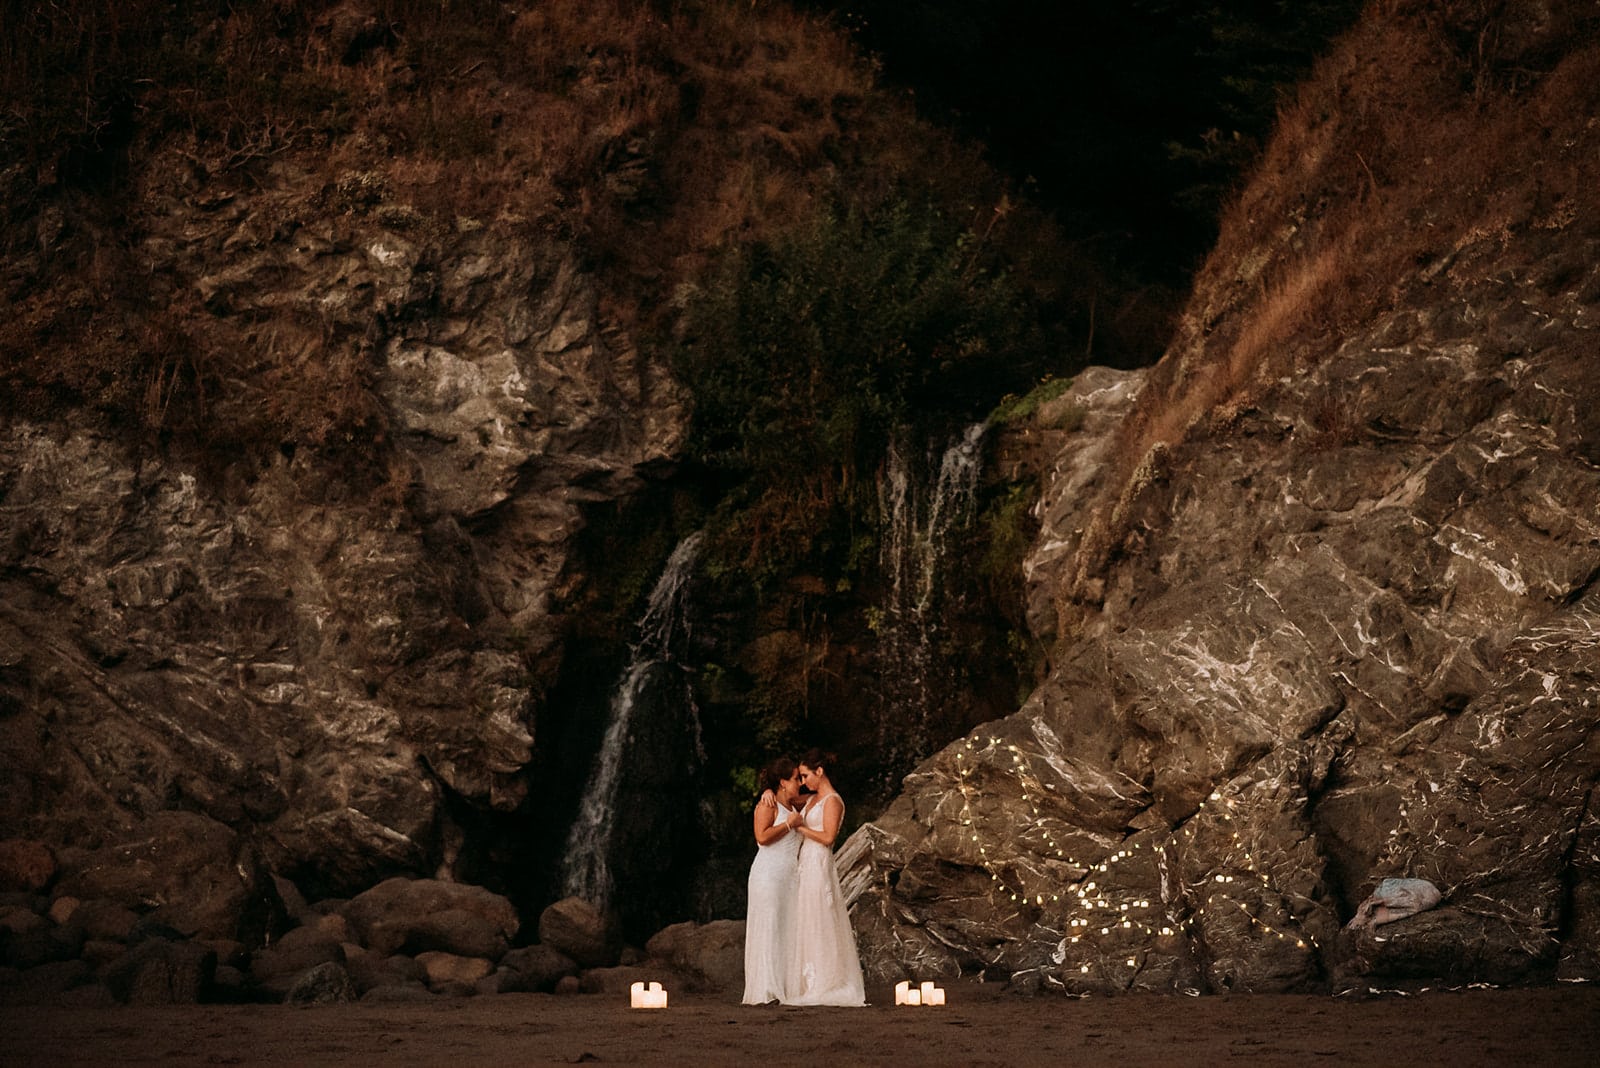 a bride and groom standing in front of a waterfall